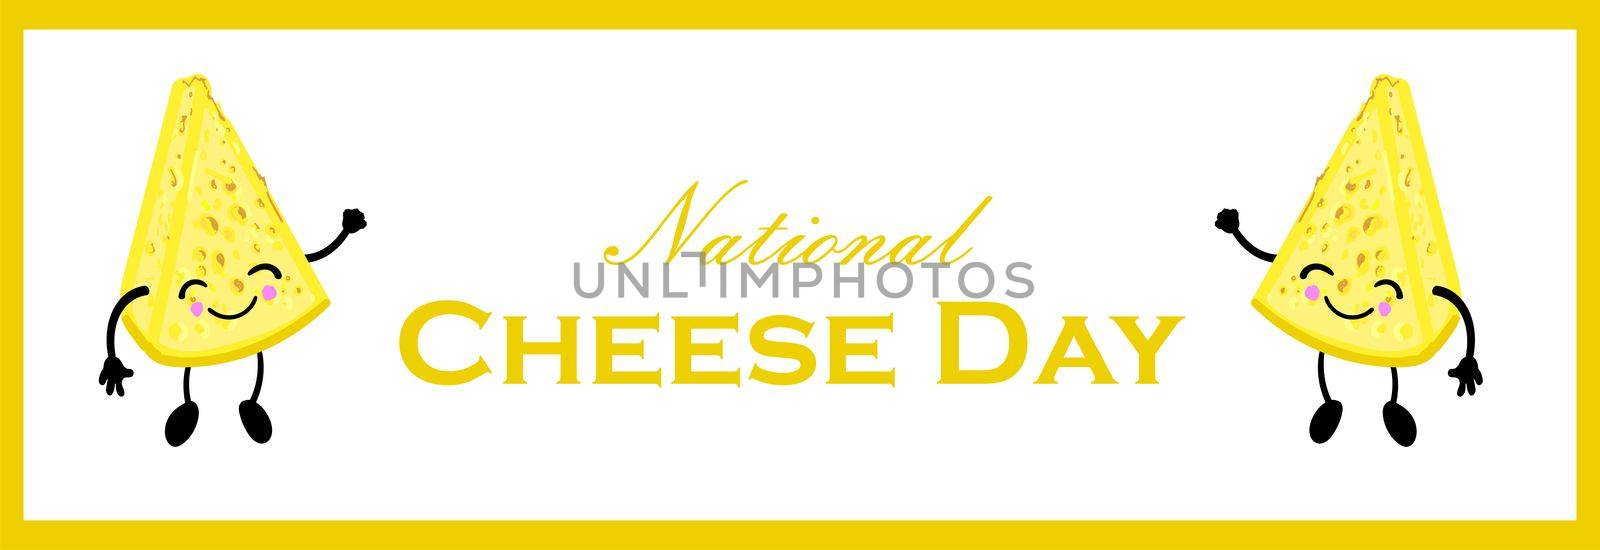 National Cheese Day. Postcard or banner for International Cheese Day. Cute cartoon cheesy character. Cheese with a face and a smile. Dairy.